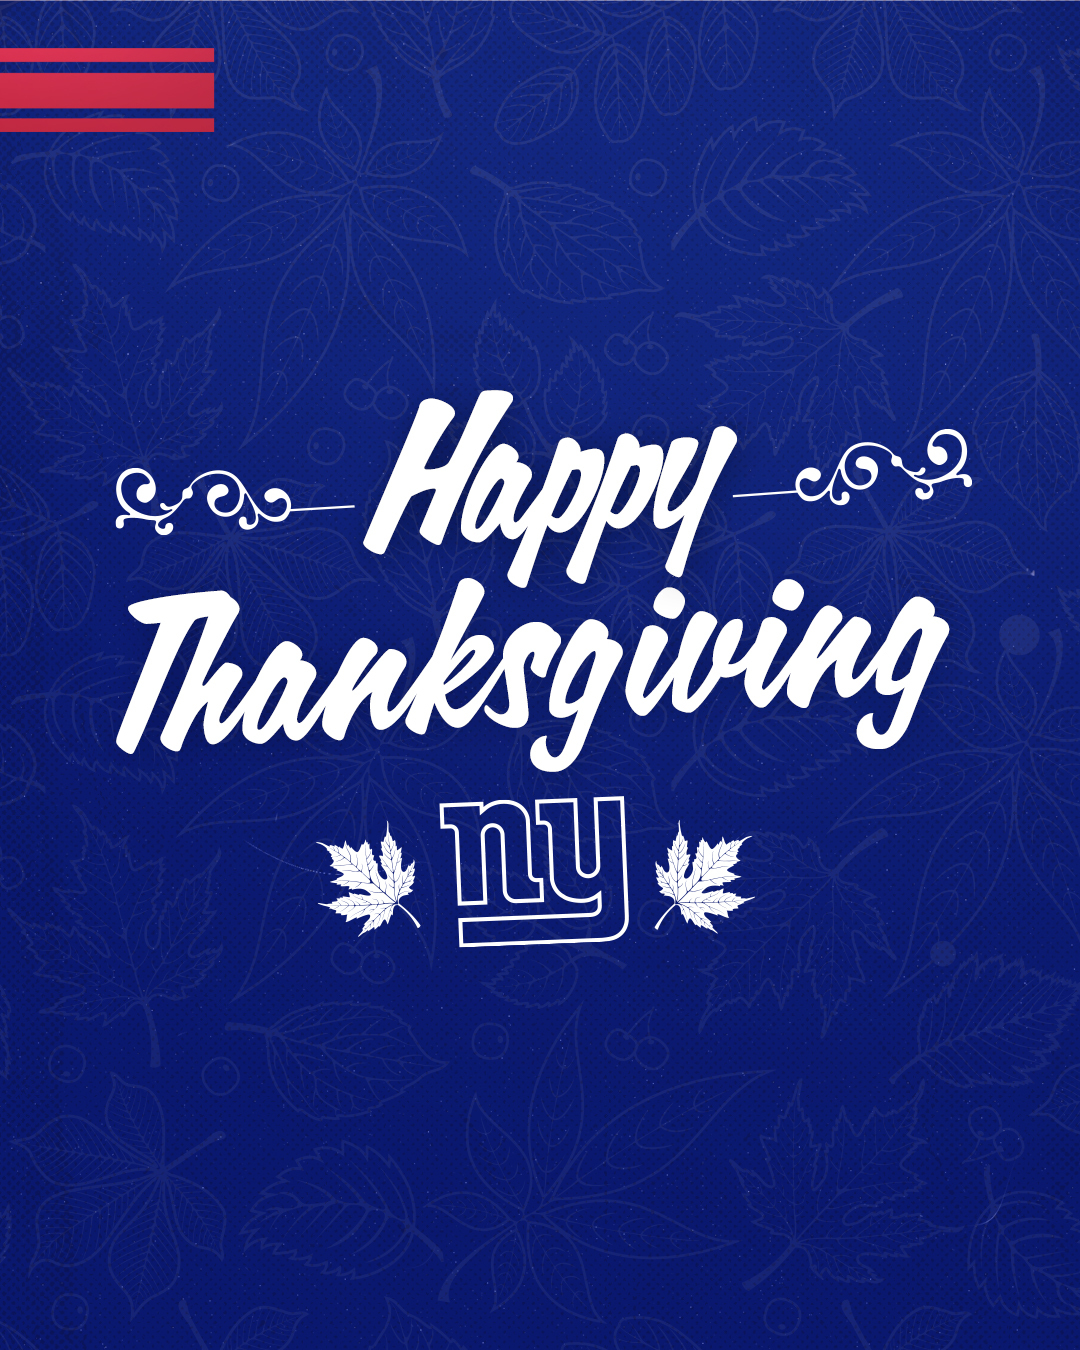 ny giants on thanksgiving